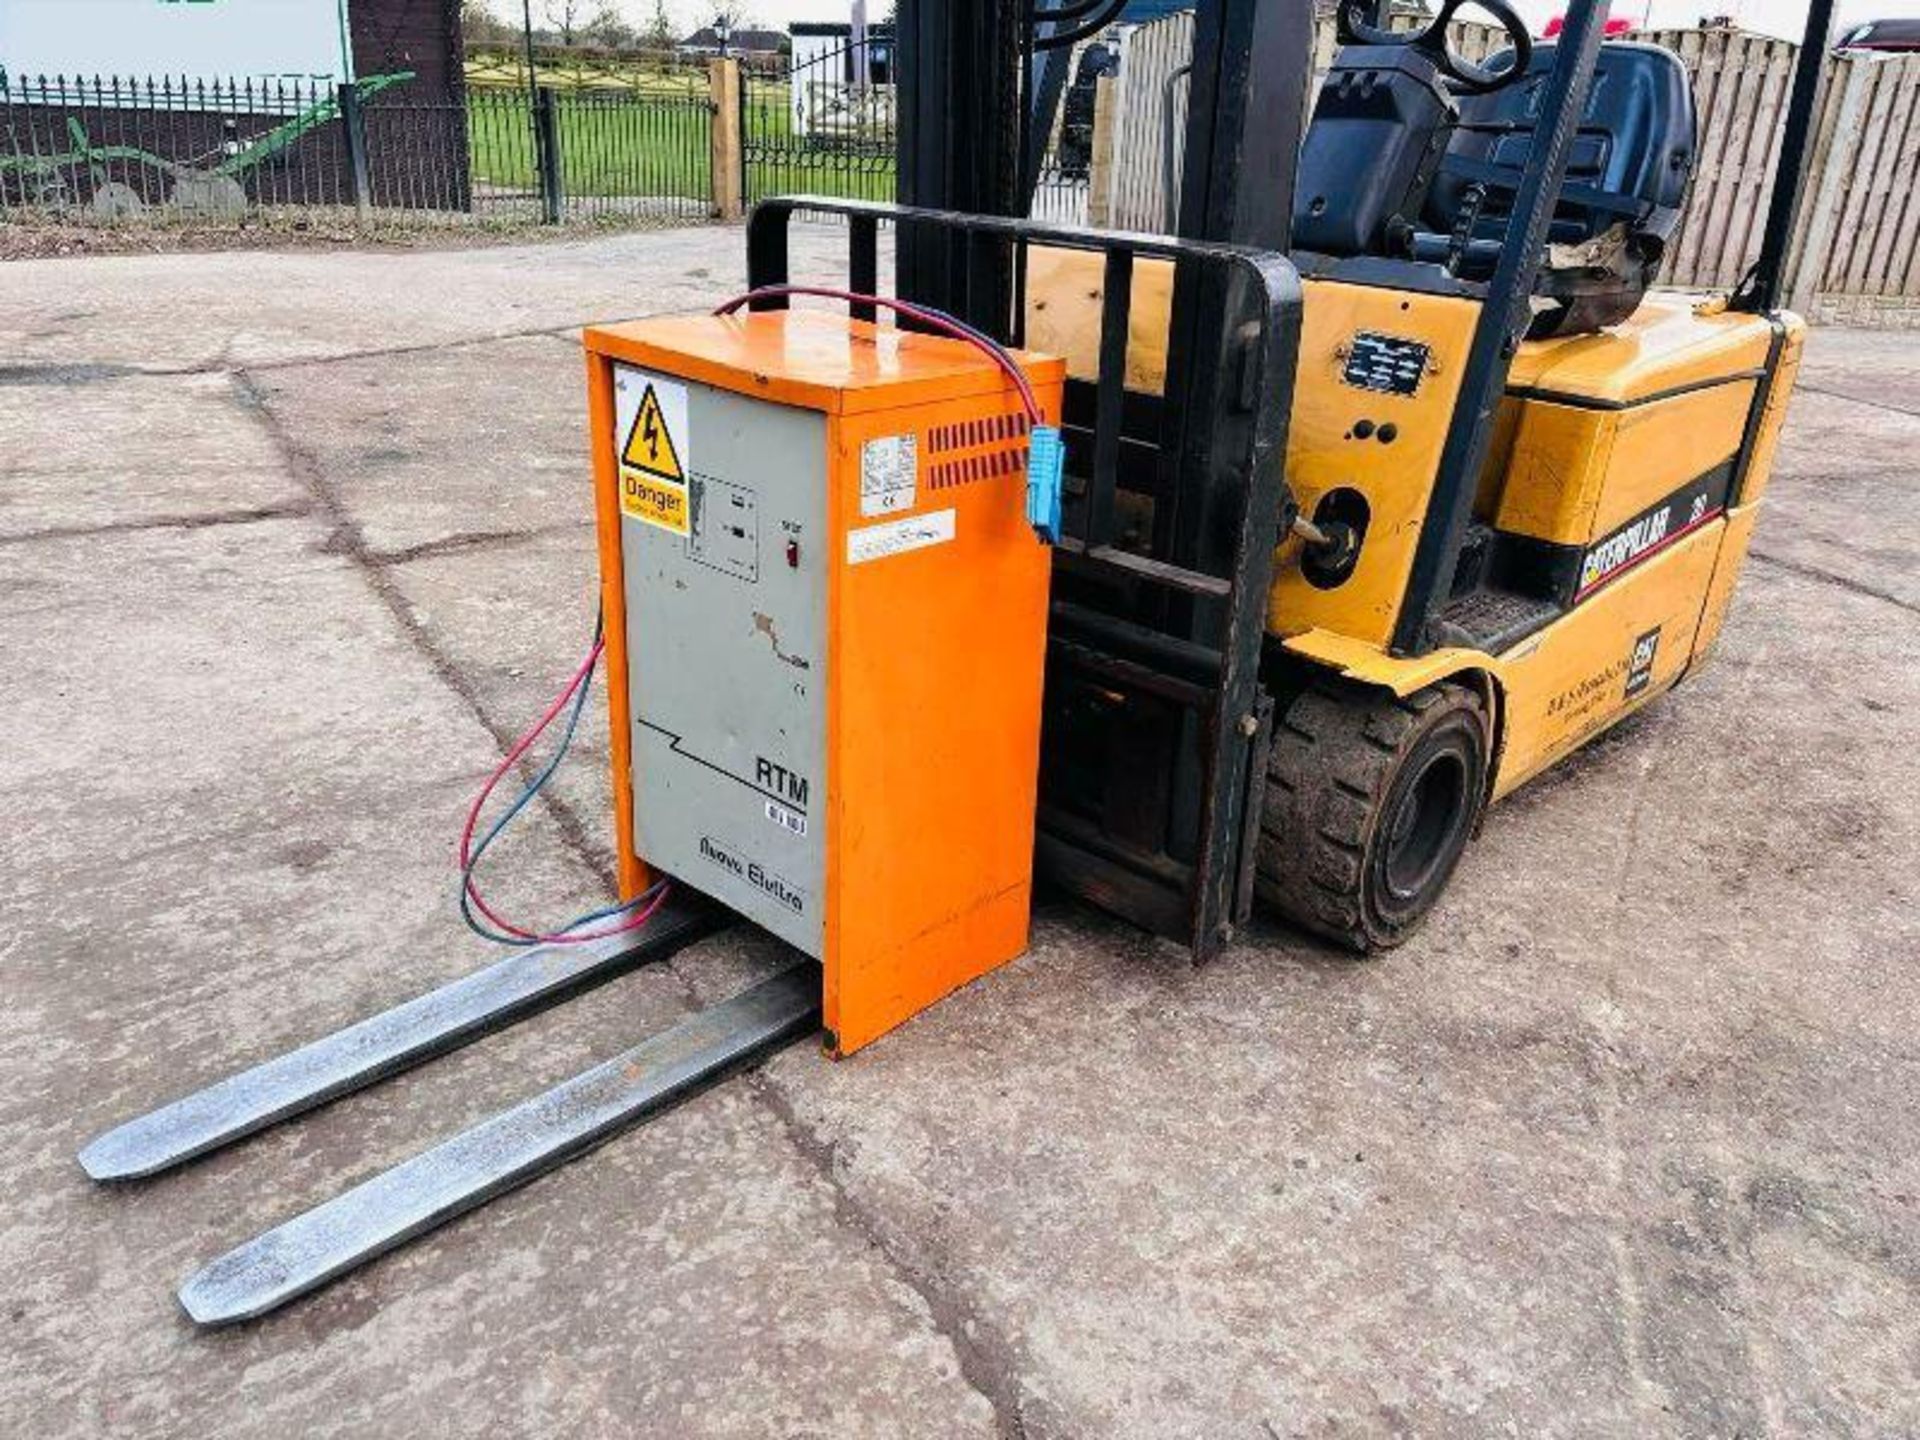 CATERPILLAR 20 BATTERY FORKLIFT C/W BATTERY CHARGER - Image 2 of 17